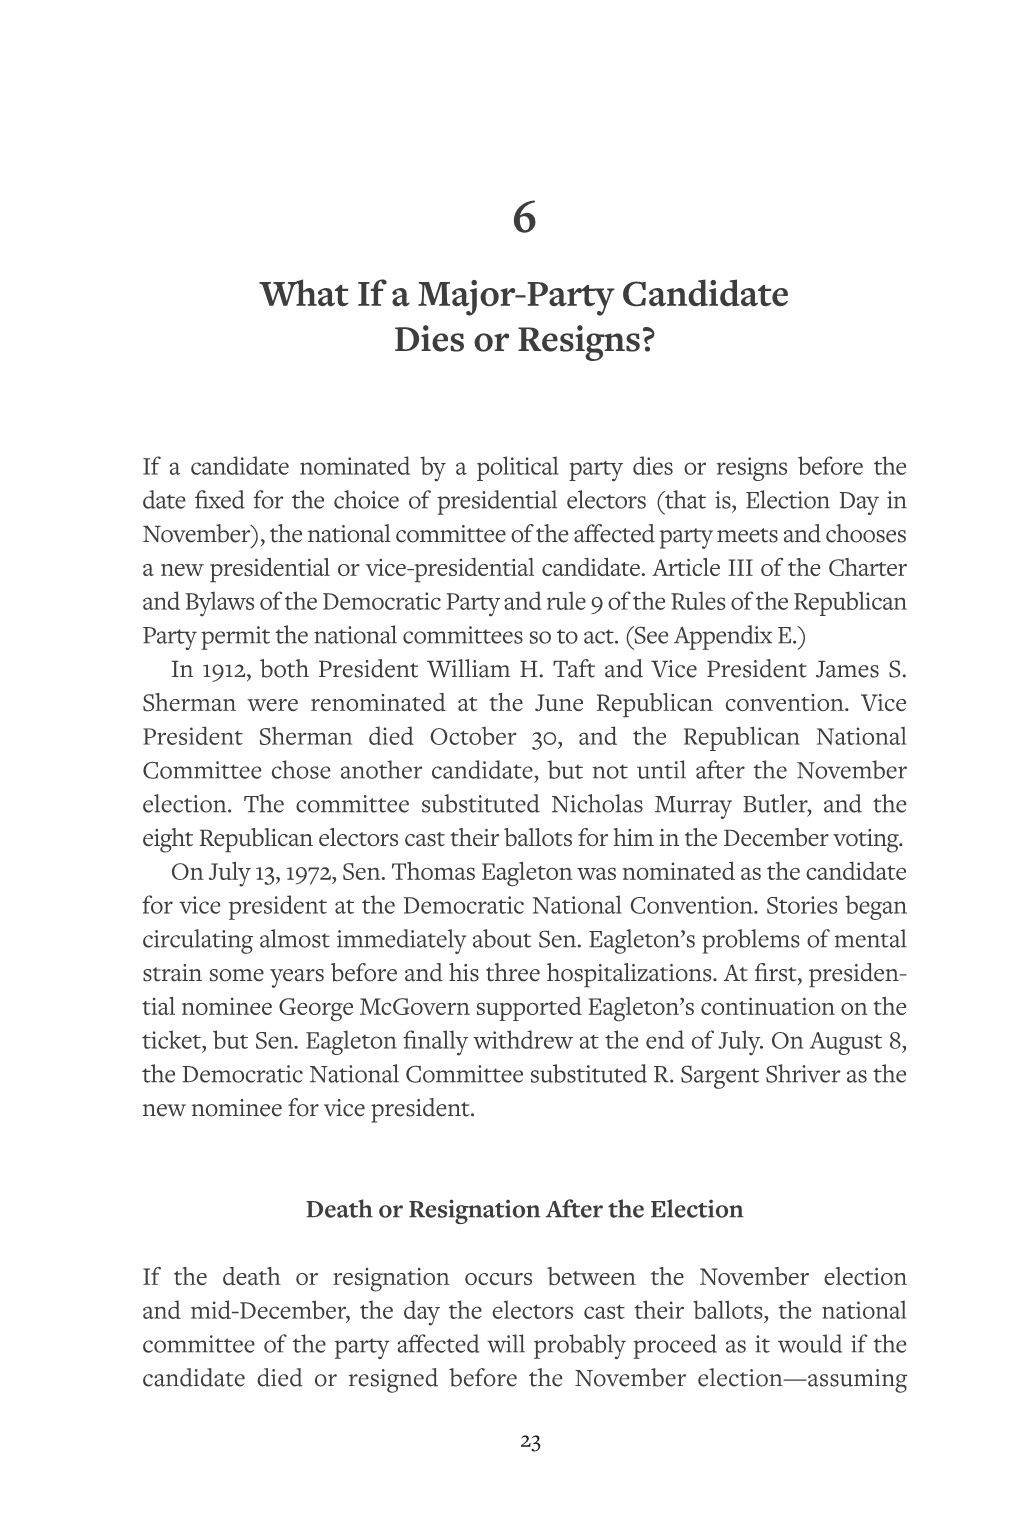 What If a Major-Party Candidate Dies Or Resigns?